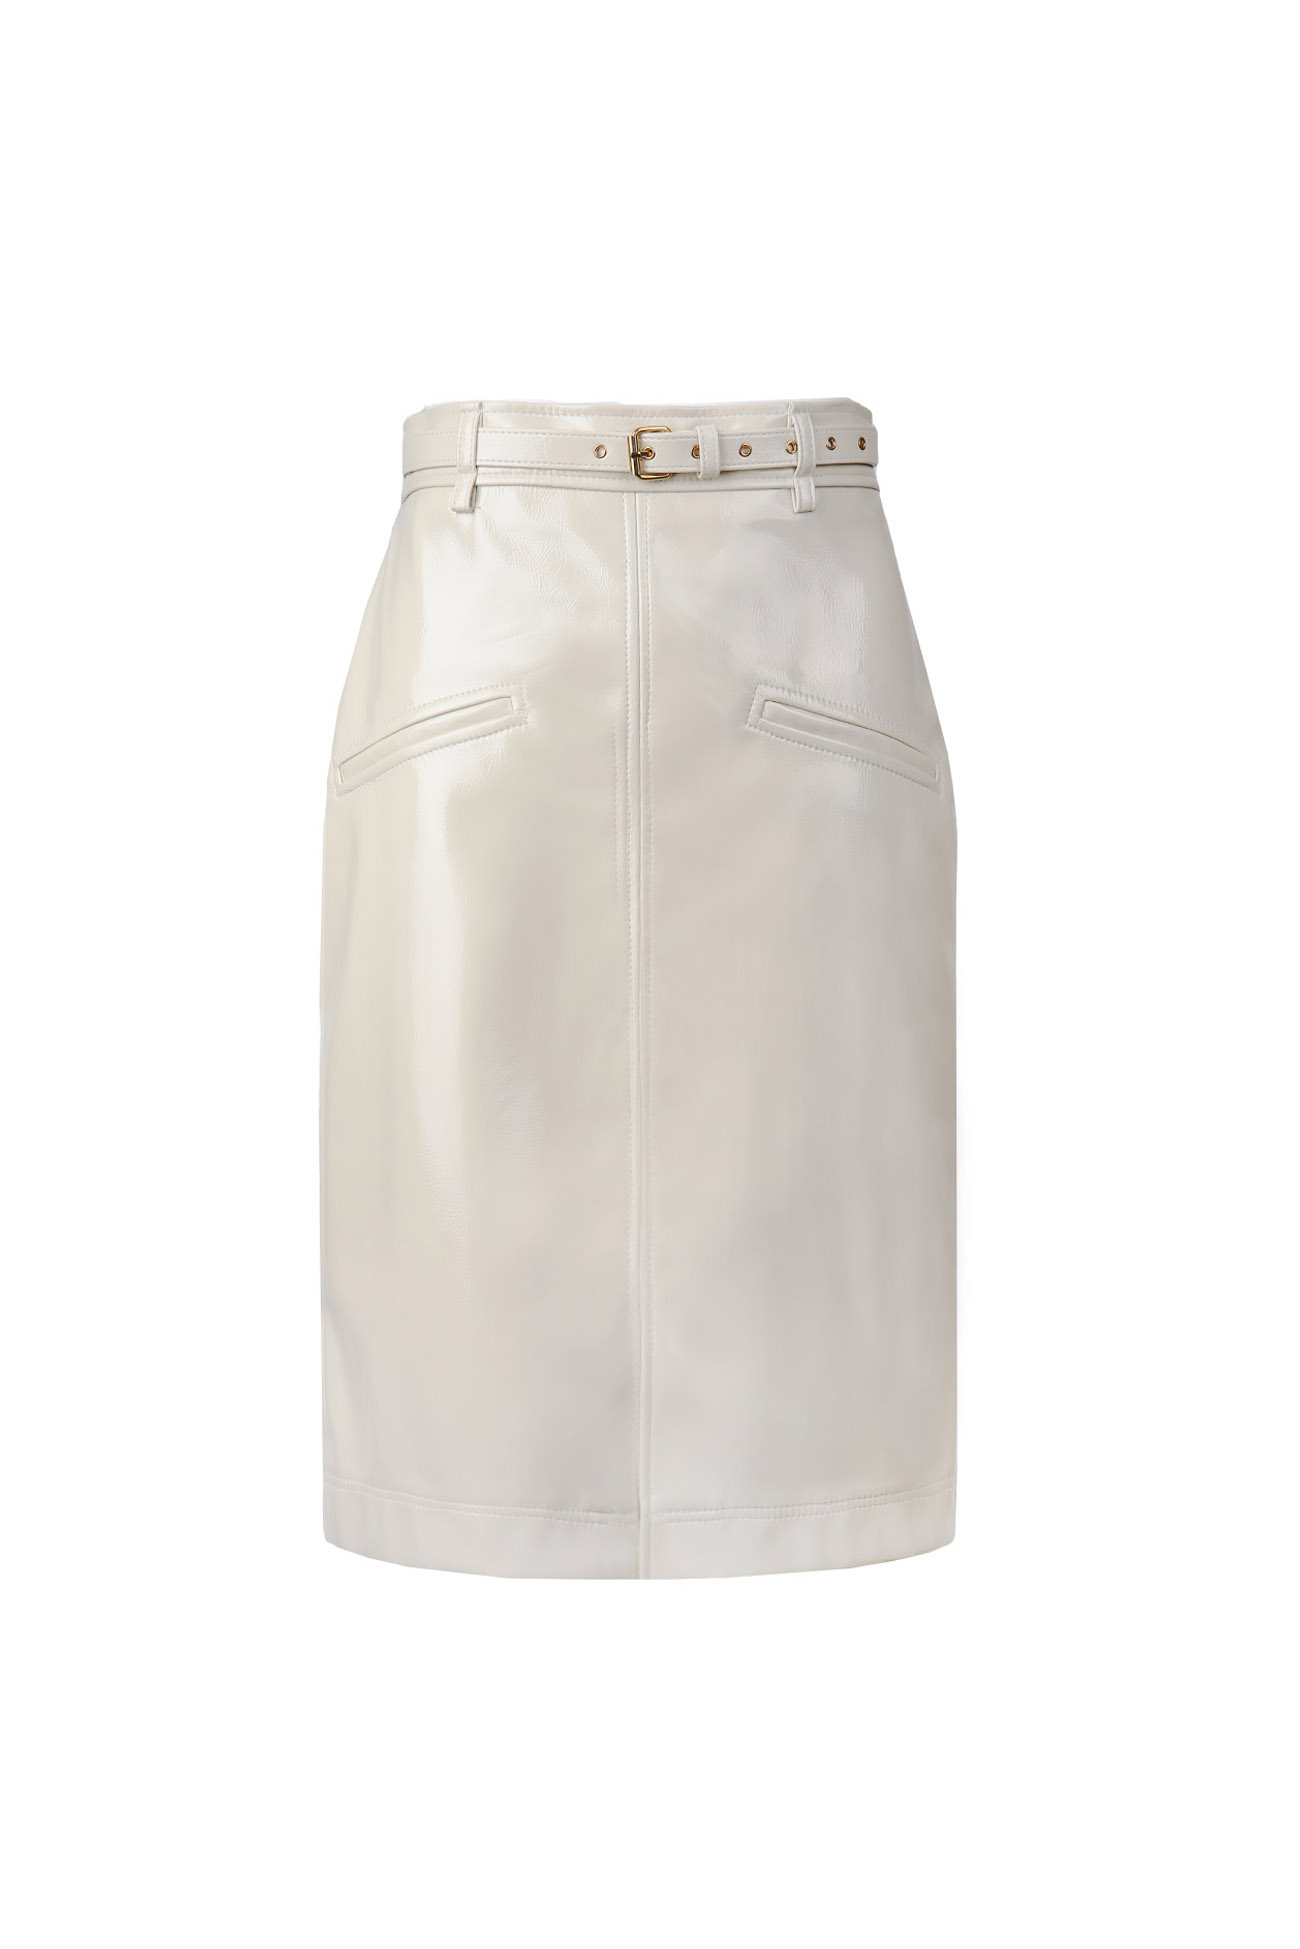 HIGH QUALITY LINE - BELTED SKIRT (IVORY) (당일출고)